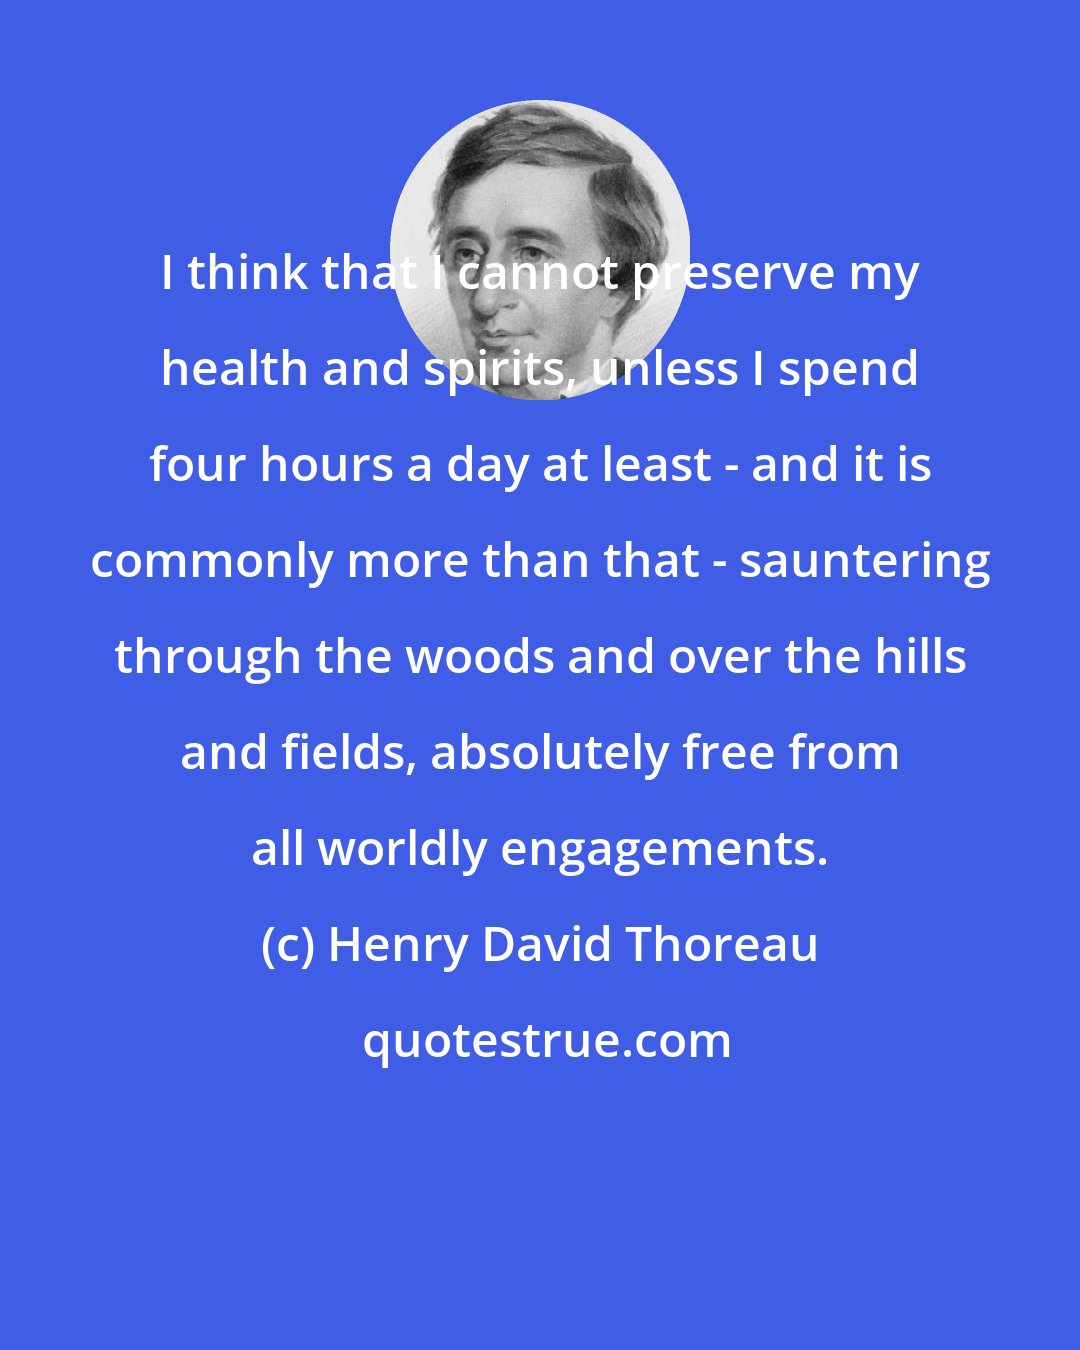 Henry David Thoreau: I think that I cannot preserve my health and spirits, unless I spend four hours a day at least - and it is commonly more than that - sauntering through the woods and over the hills and fields, absolutely free from all worldly engagements.